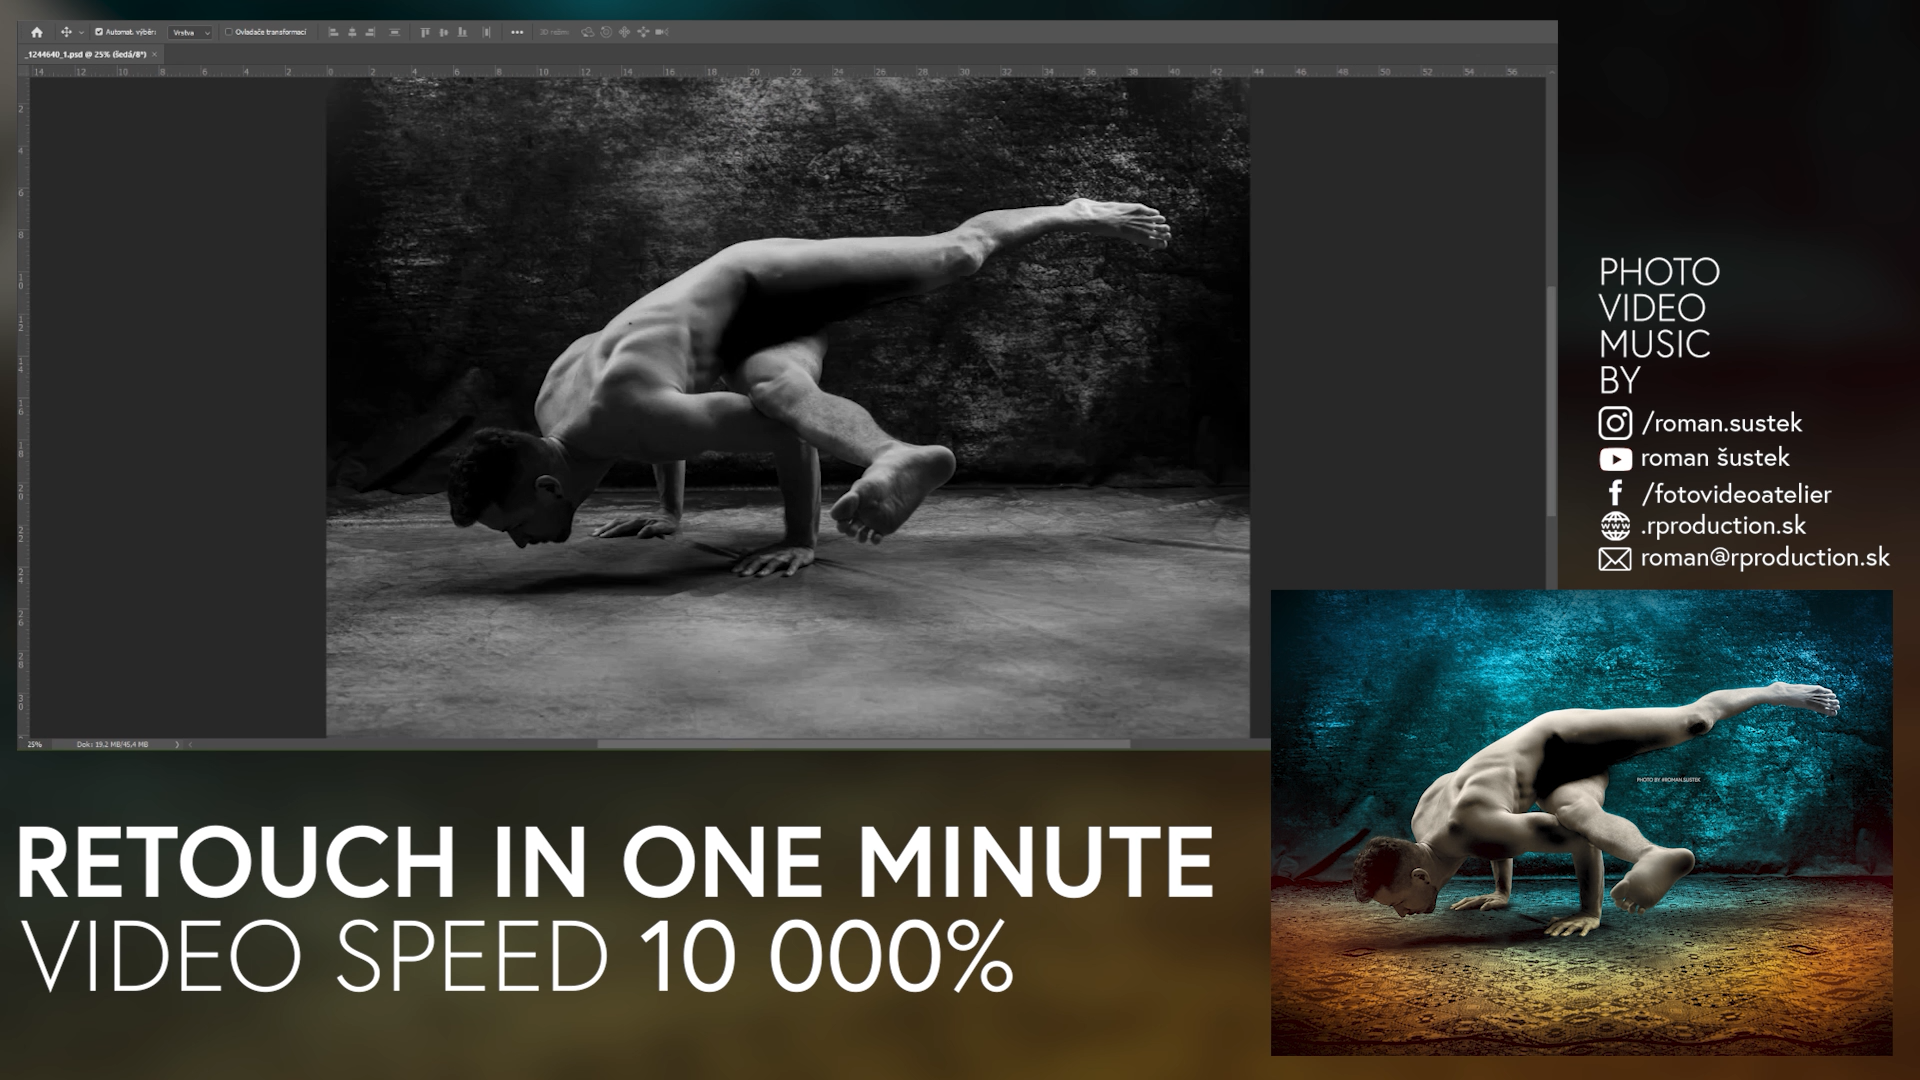 bw hand colored retouch photo with yoga instructor, 10 000% video speed, retouch in one minute